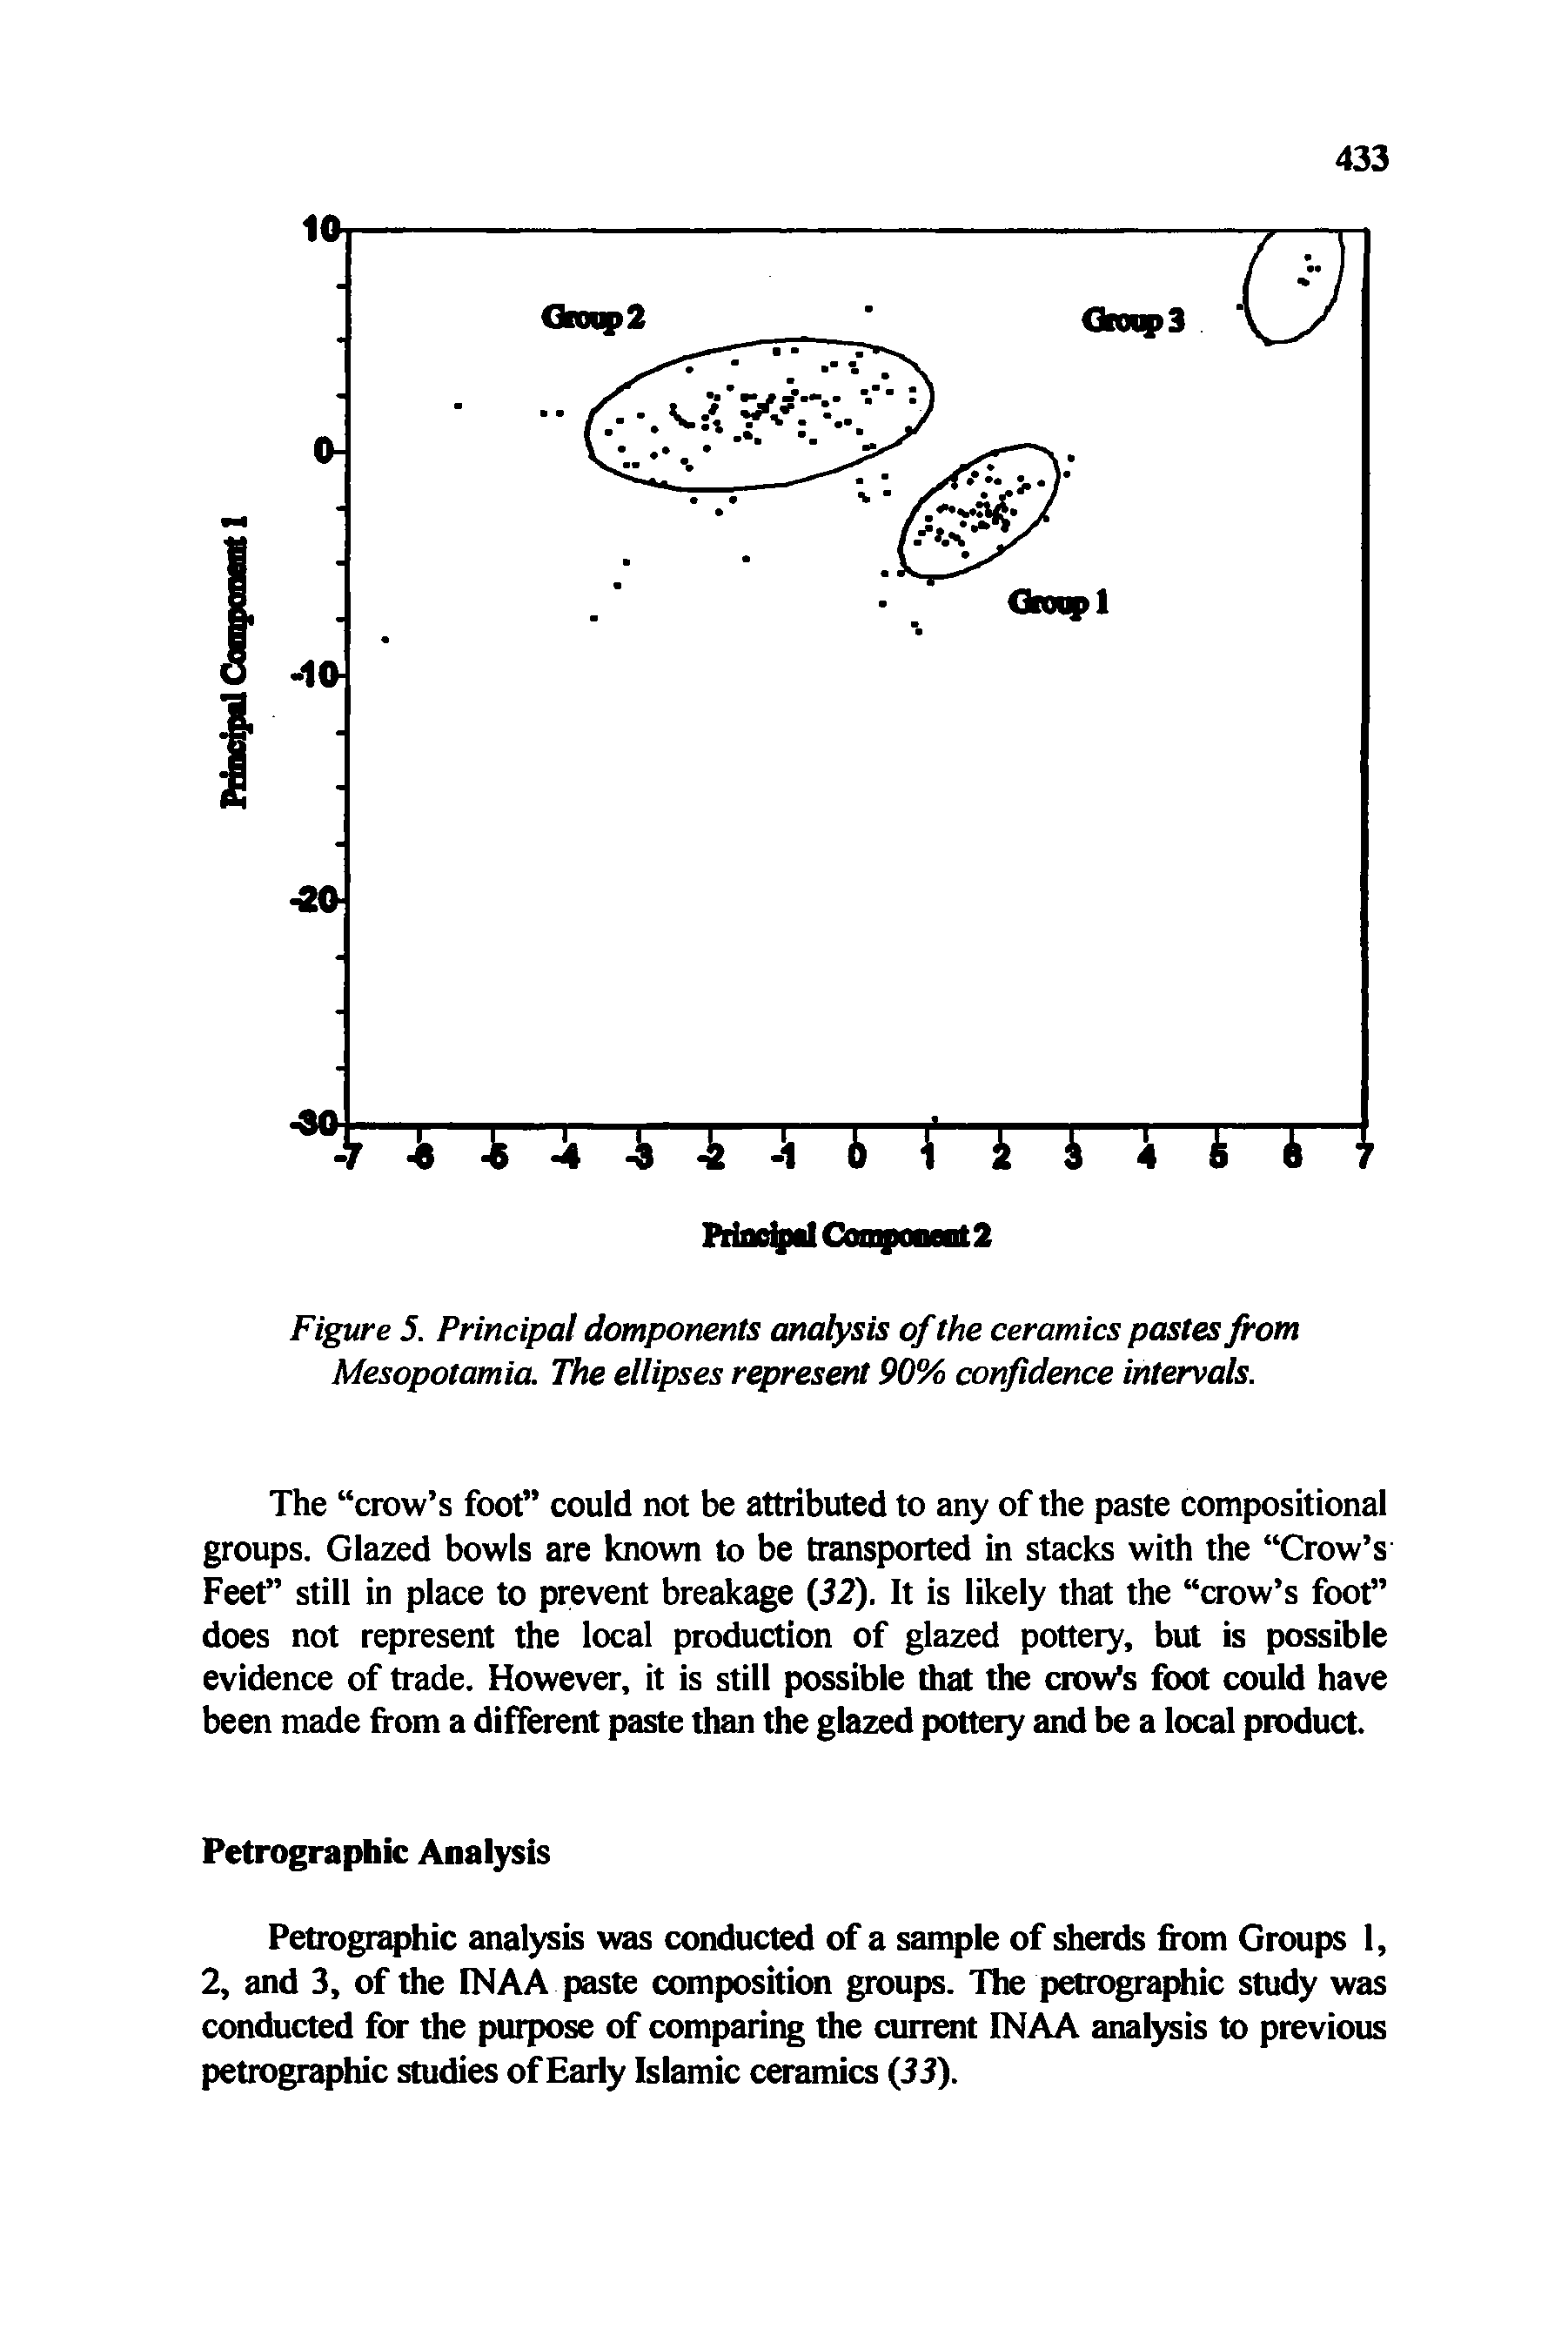 Figure 5. Principal domponents analysis of the ceramics pastes from Mesopotamia. The ellipses represent 90% confidence intervals.